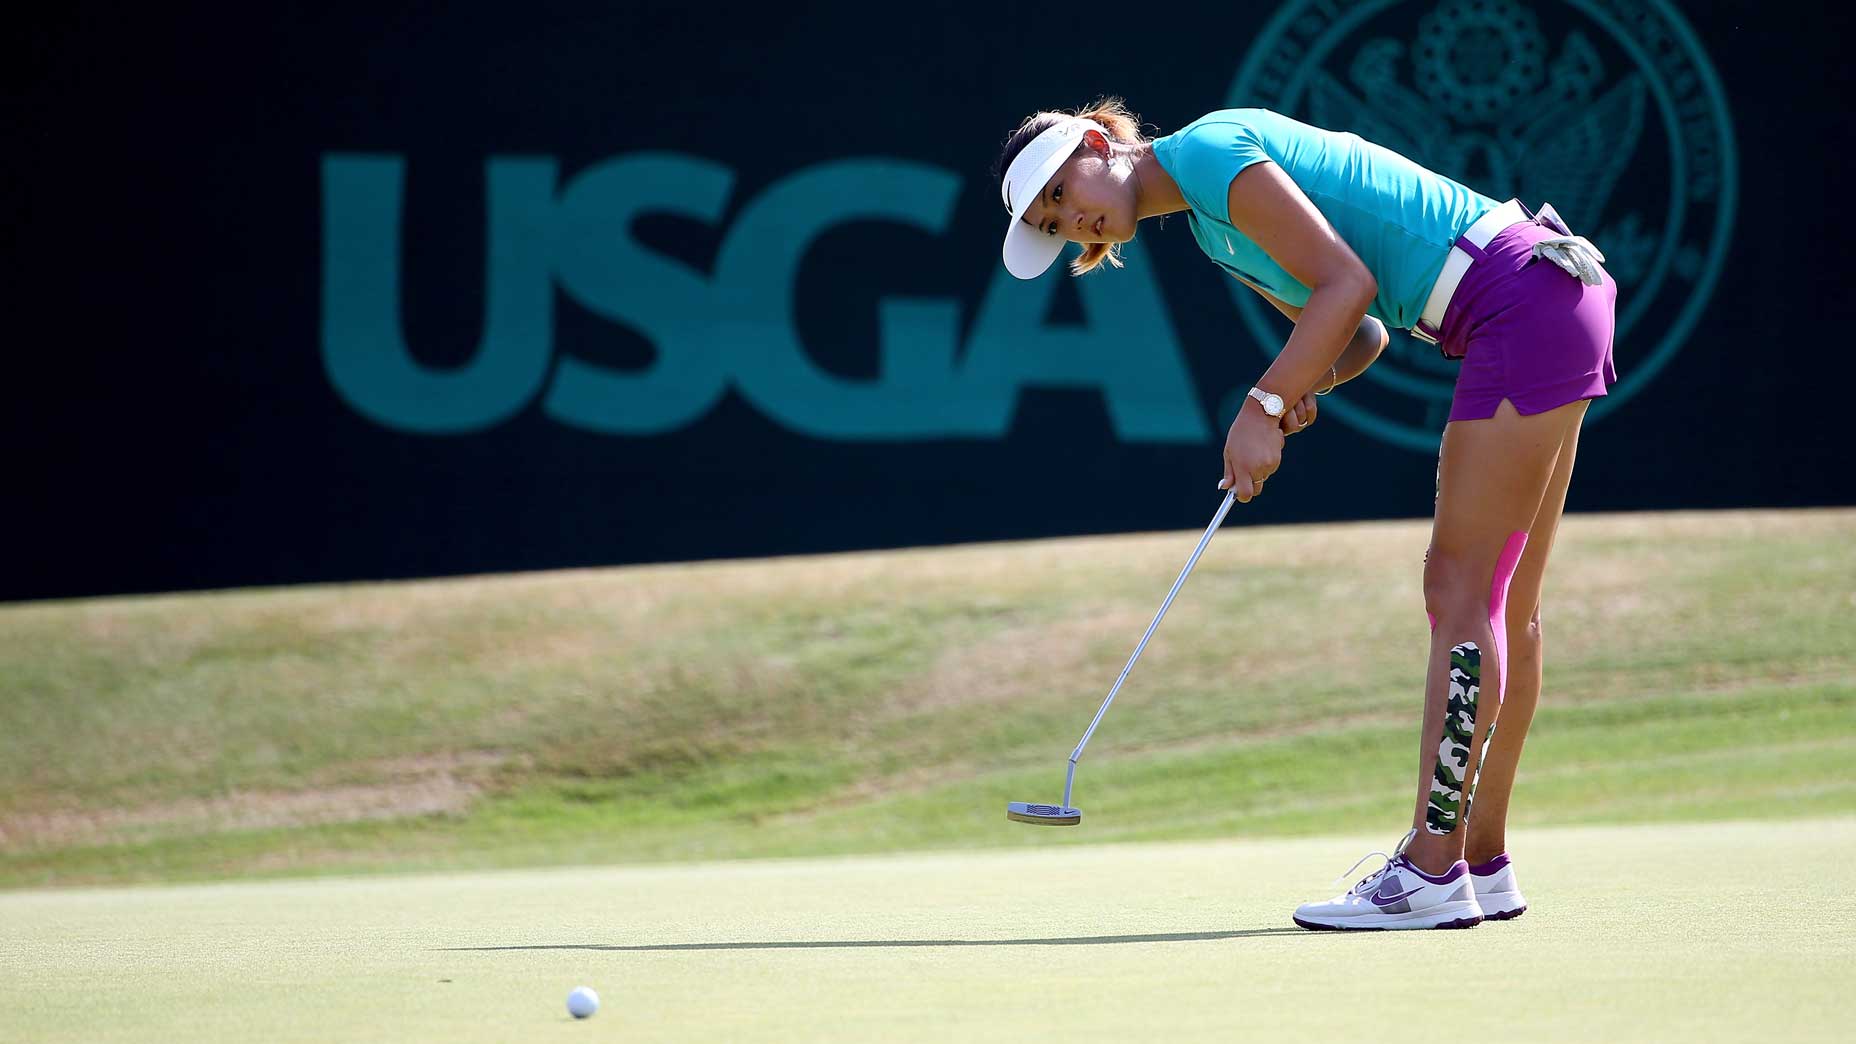 This putting mindset helped Michelle Wie West win a major title picture